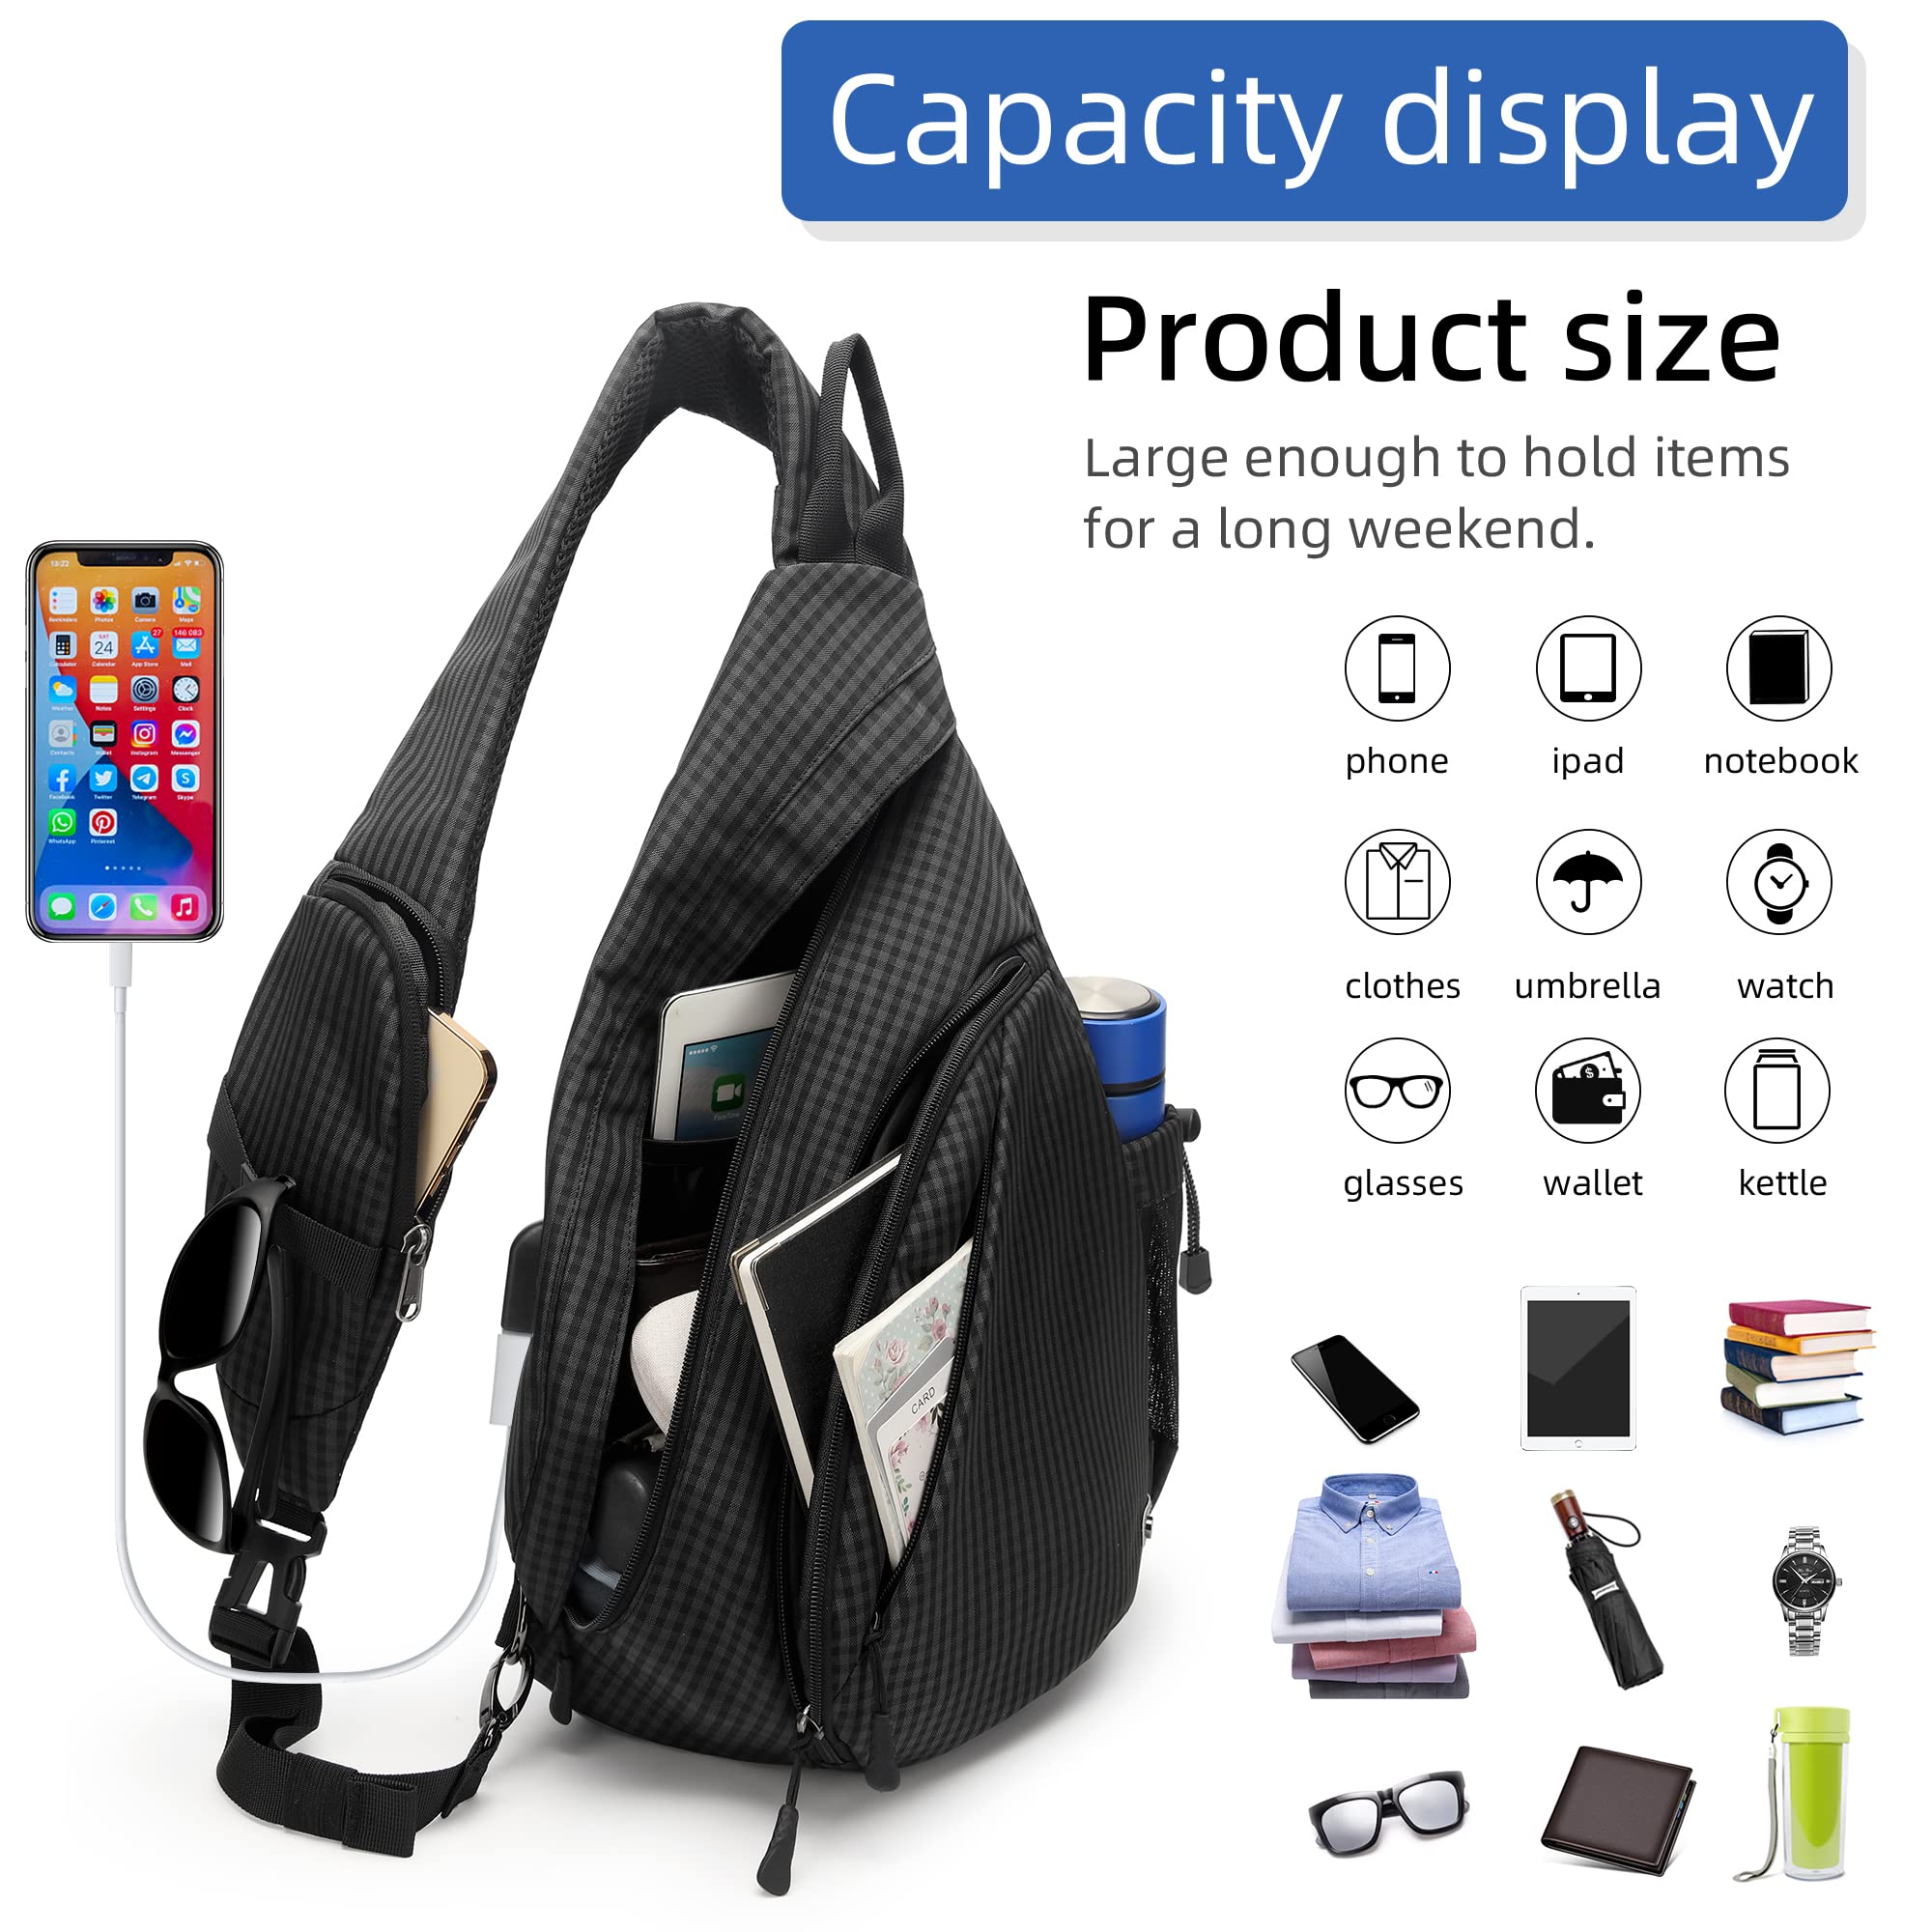 TurnWay Water-Proof Sling bag/Crossbody Backpack/Shoulder Bag with USB Charging Port for Travel, Hiking, Cycling, Camping